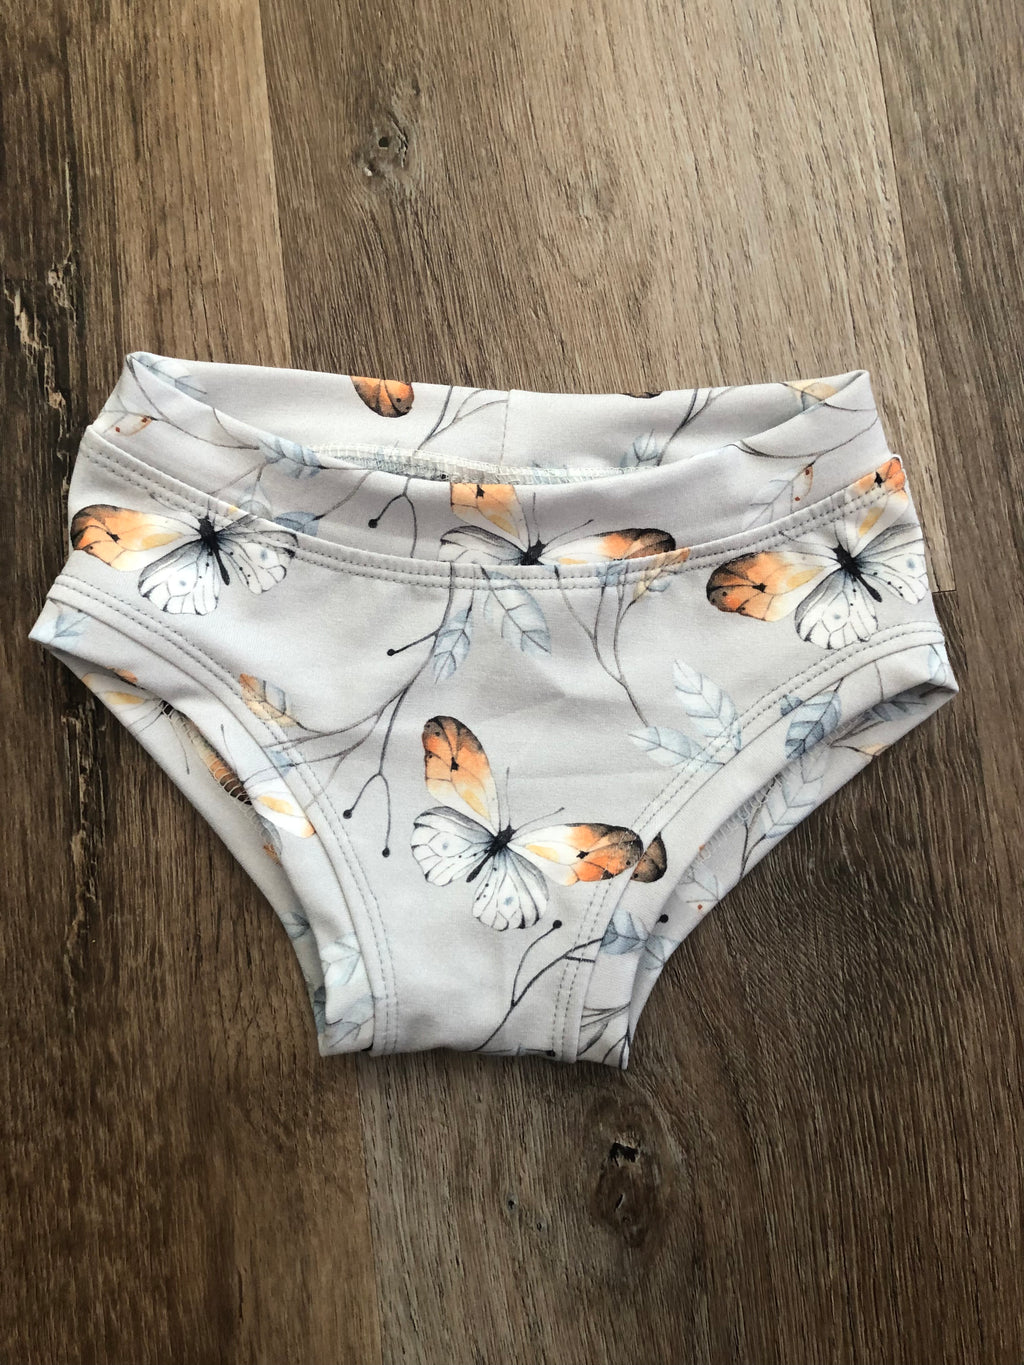 Frosted flutters Kids Undies size 3-4